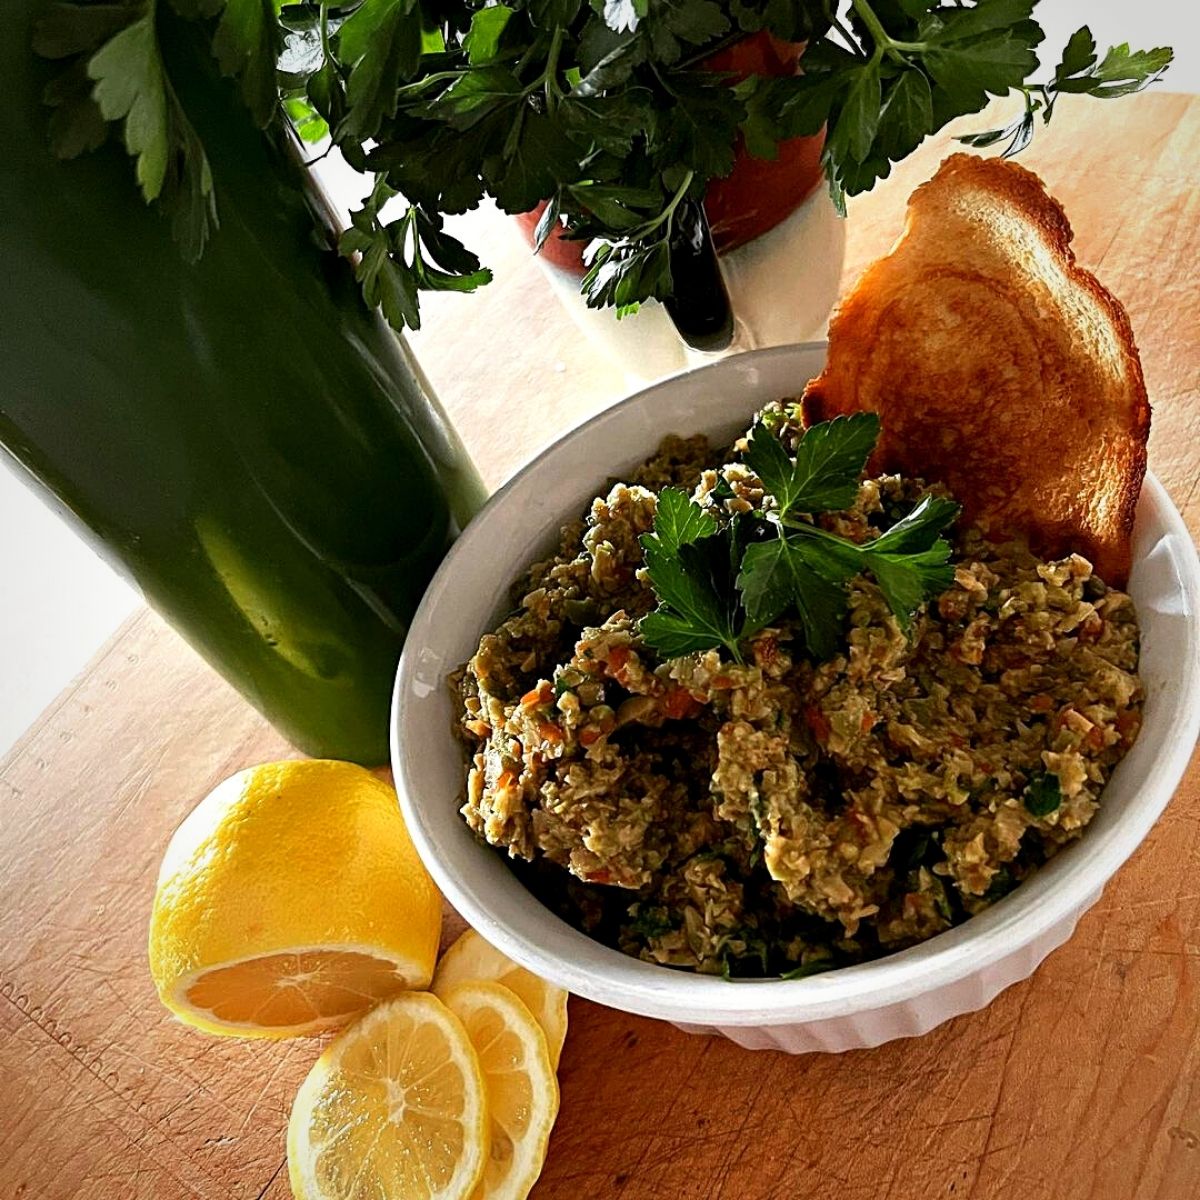 On National Olive Day you can make Olive Tapenade